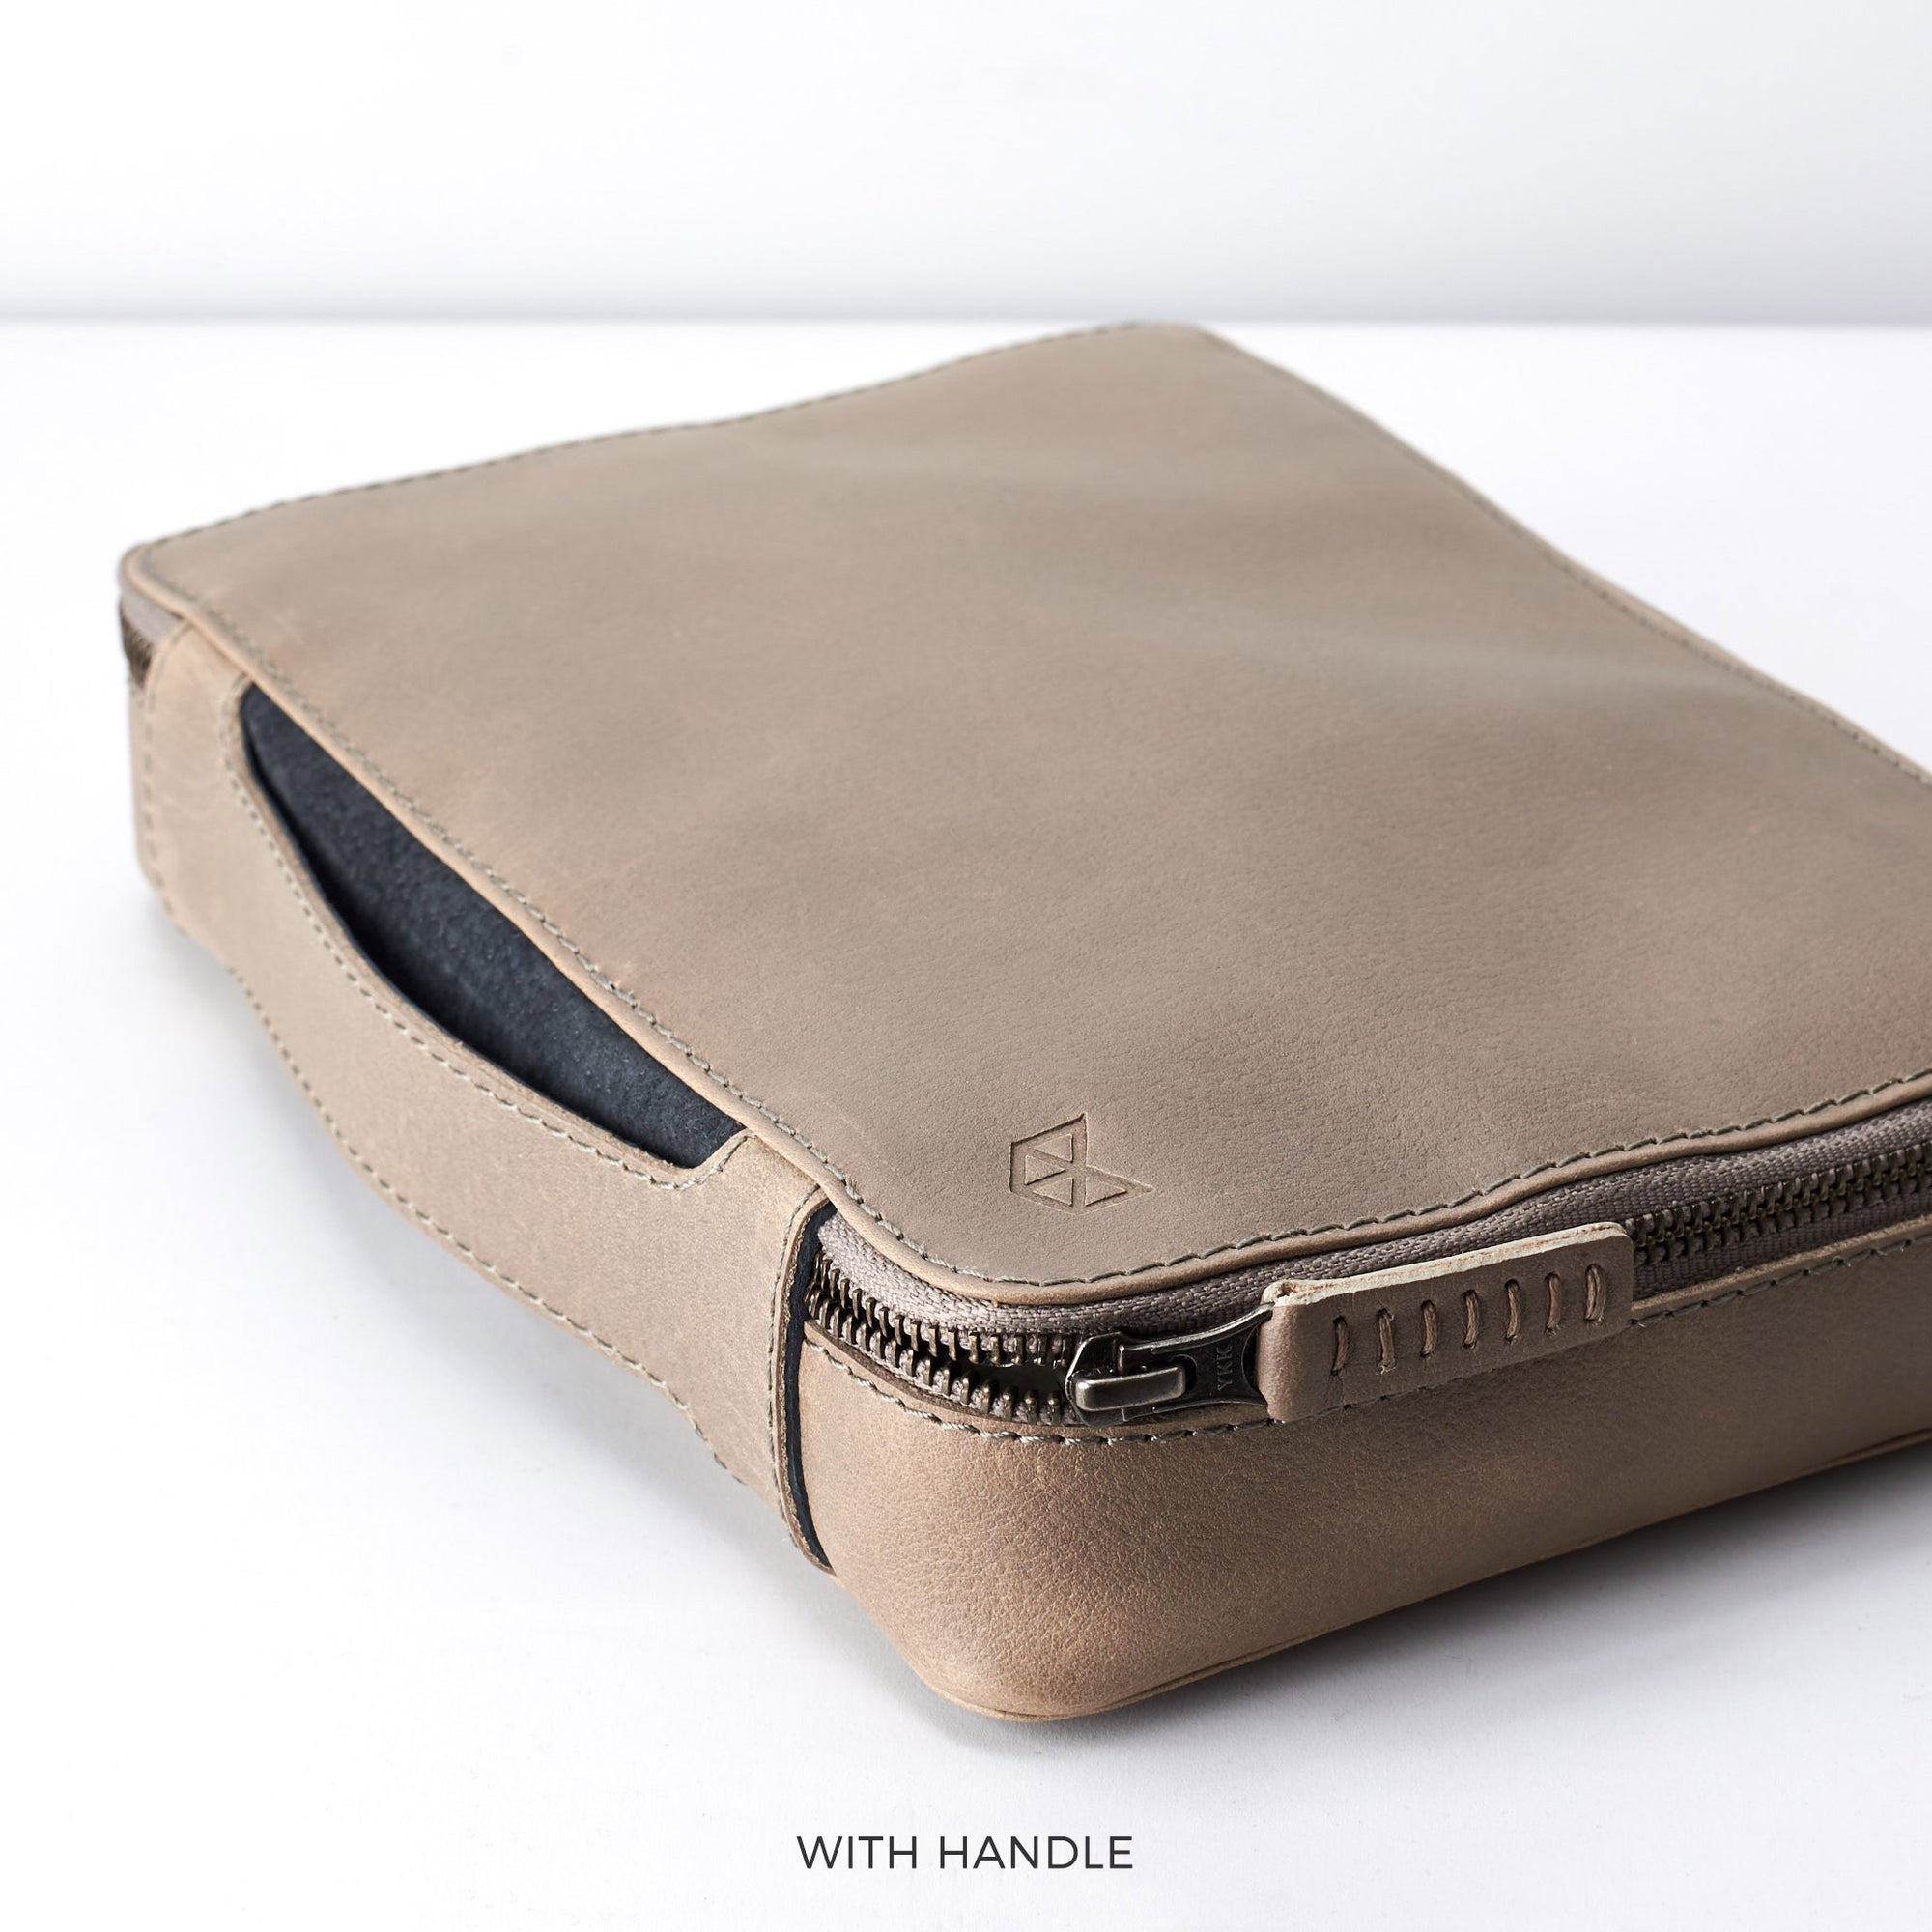 Leather handle. Grey leather gadget bag. Small EDC gear pouch by Capra Leather